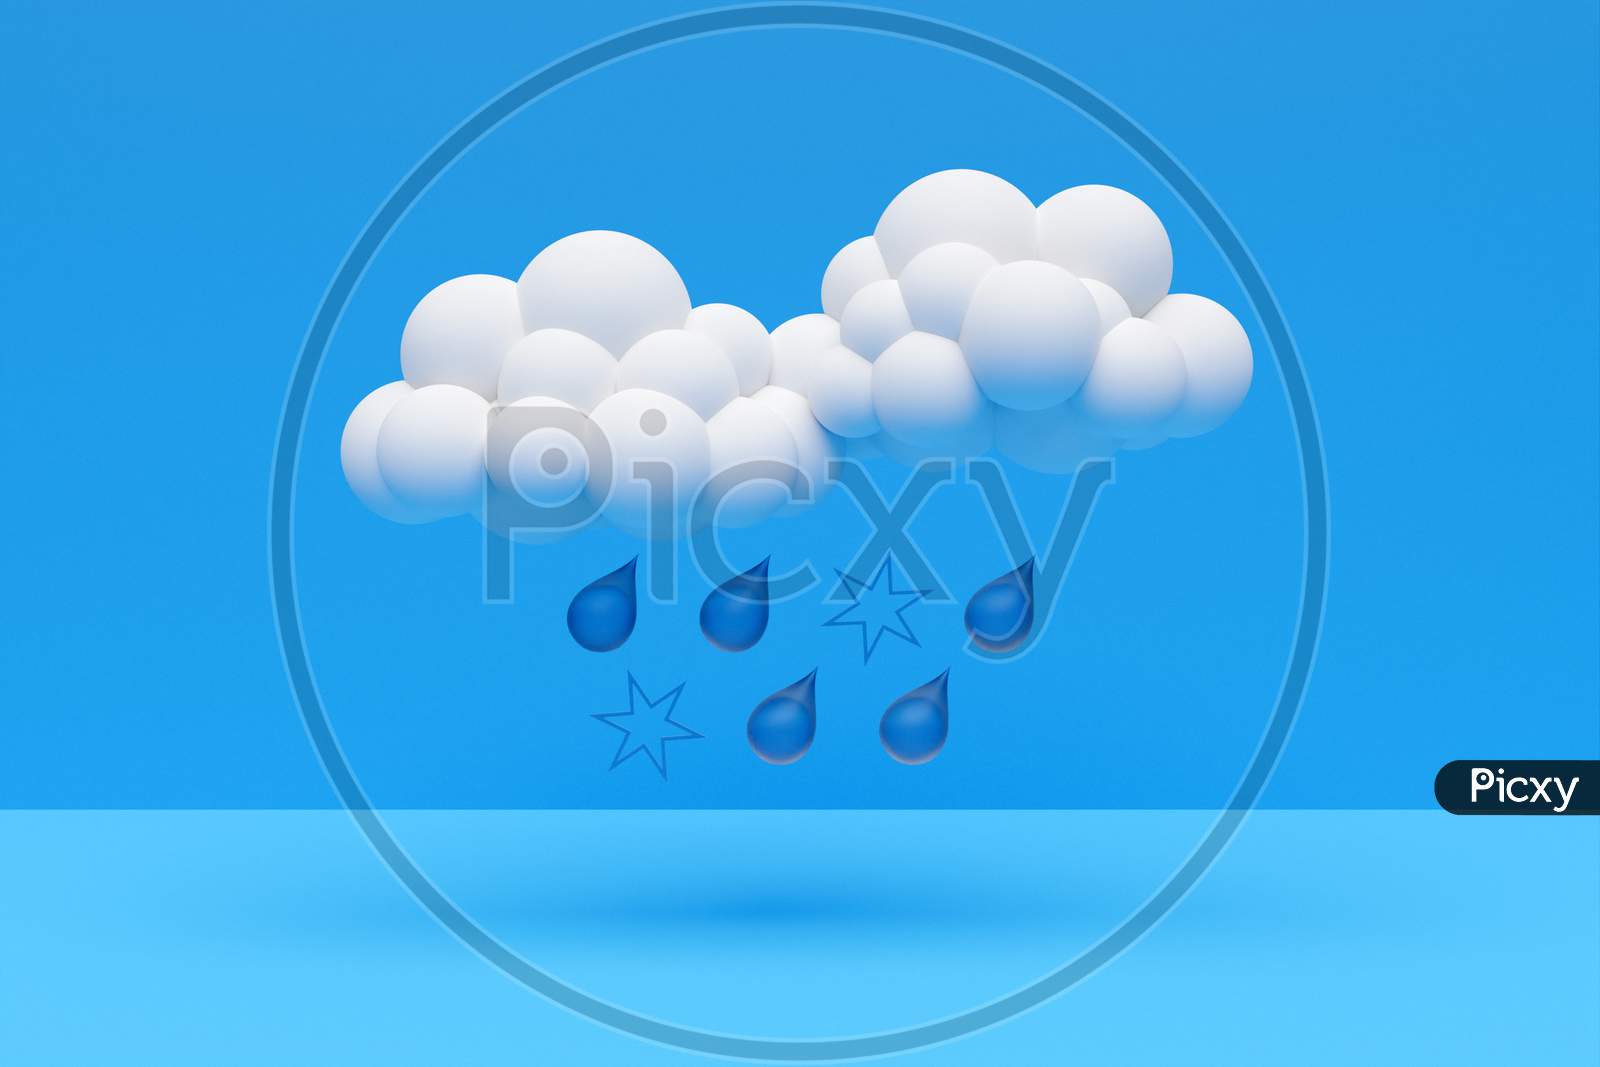 3D Illustration Of Clouds  With Rain And Snow  On A Blue Isolated Background. Weather Forecast Icons, Regular Season Clouds